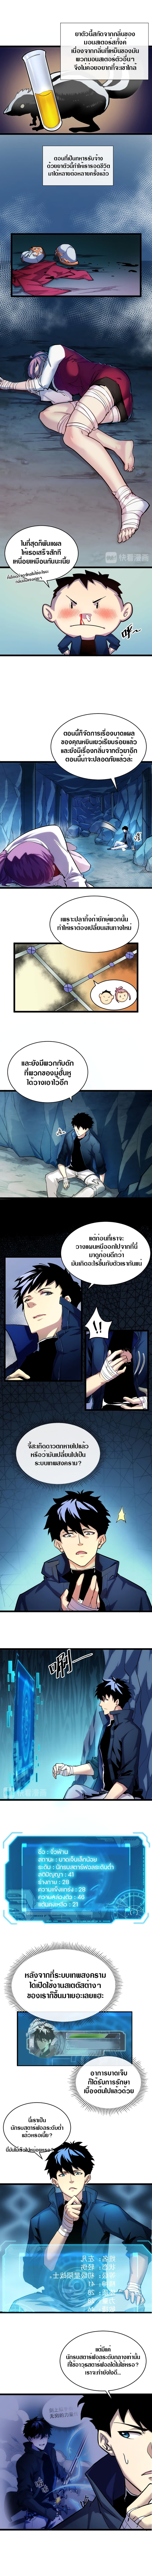 Rise From The Rubble เศษซากวันสิ้นโลก 8-8